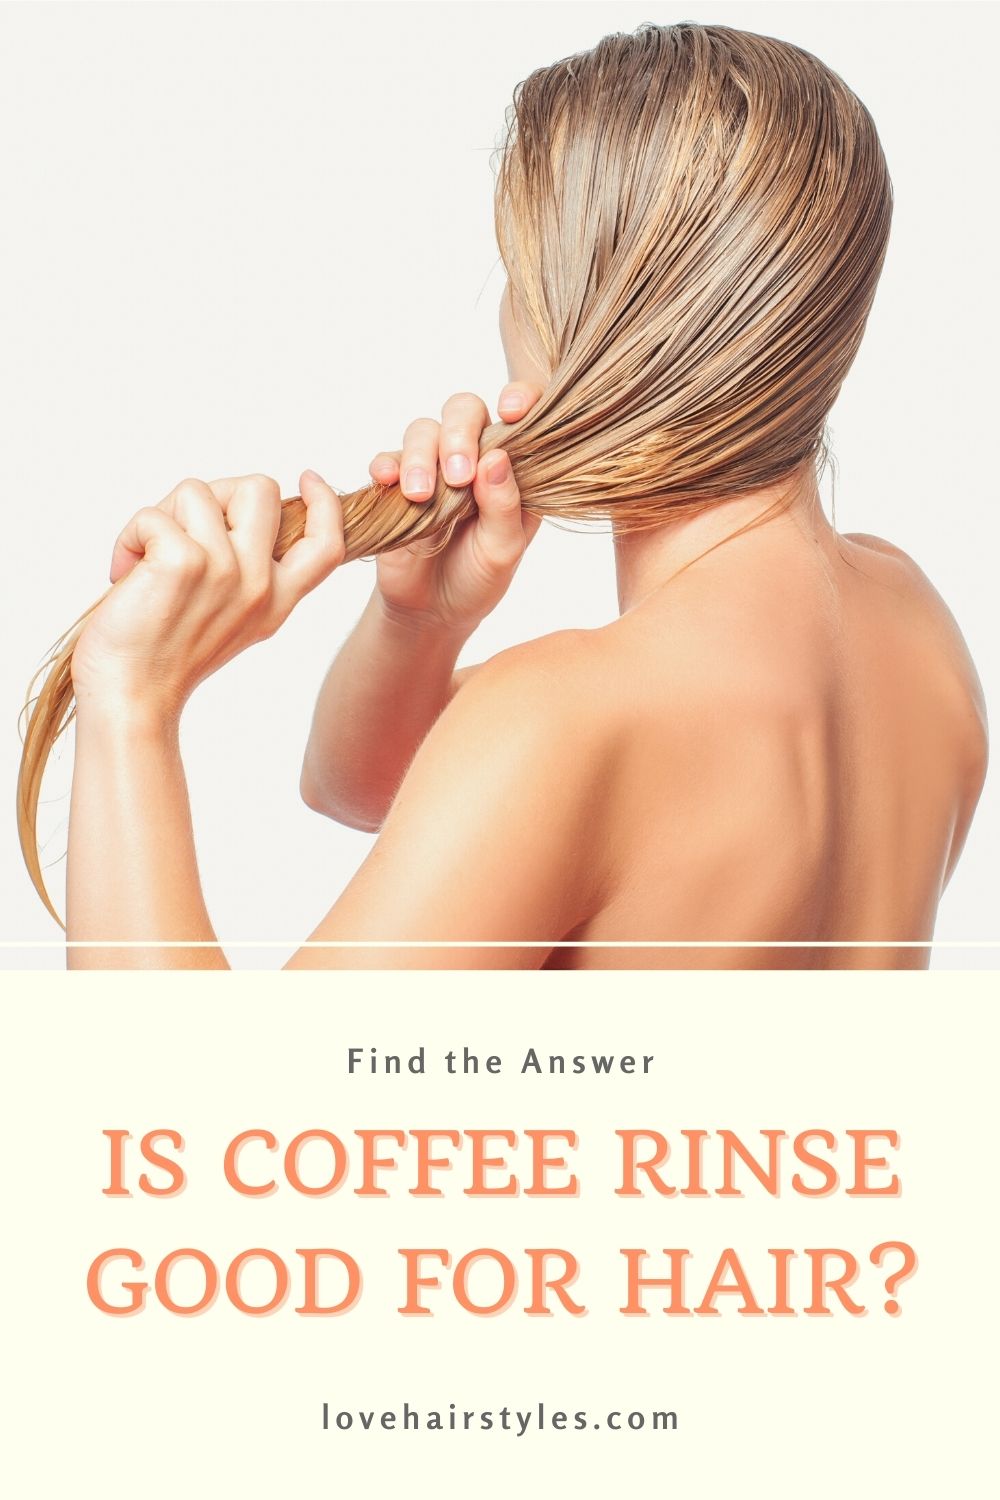 Is coffee rinse good for hair?